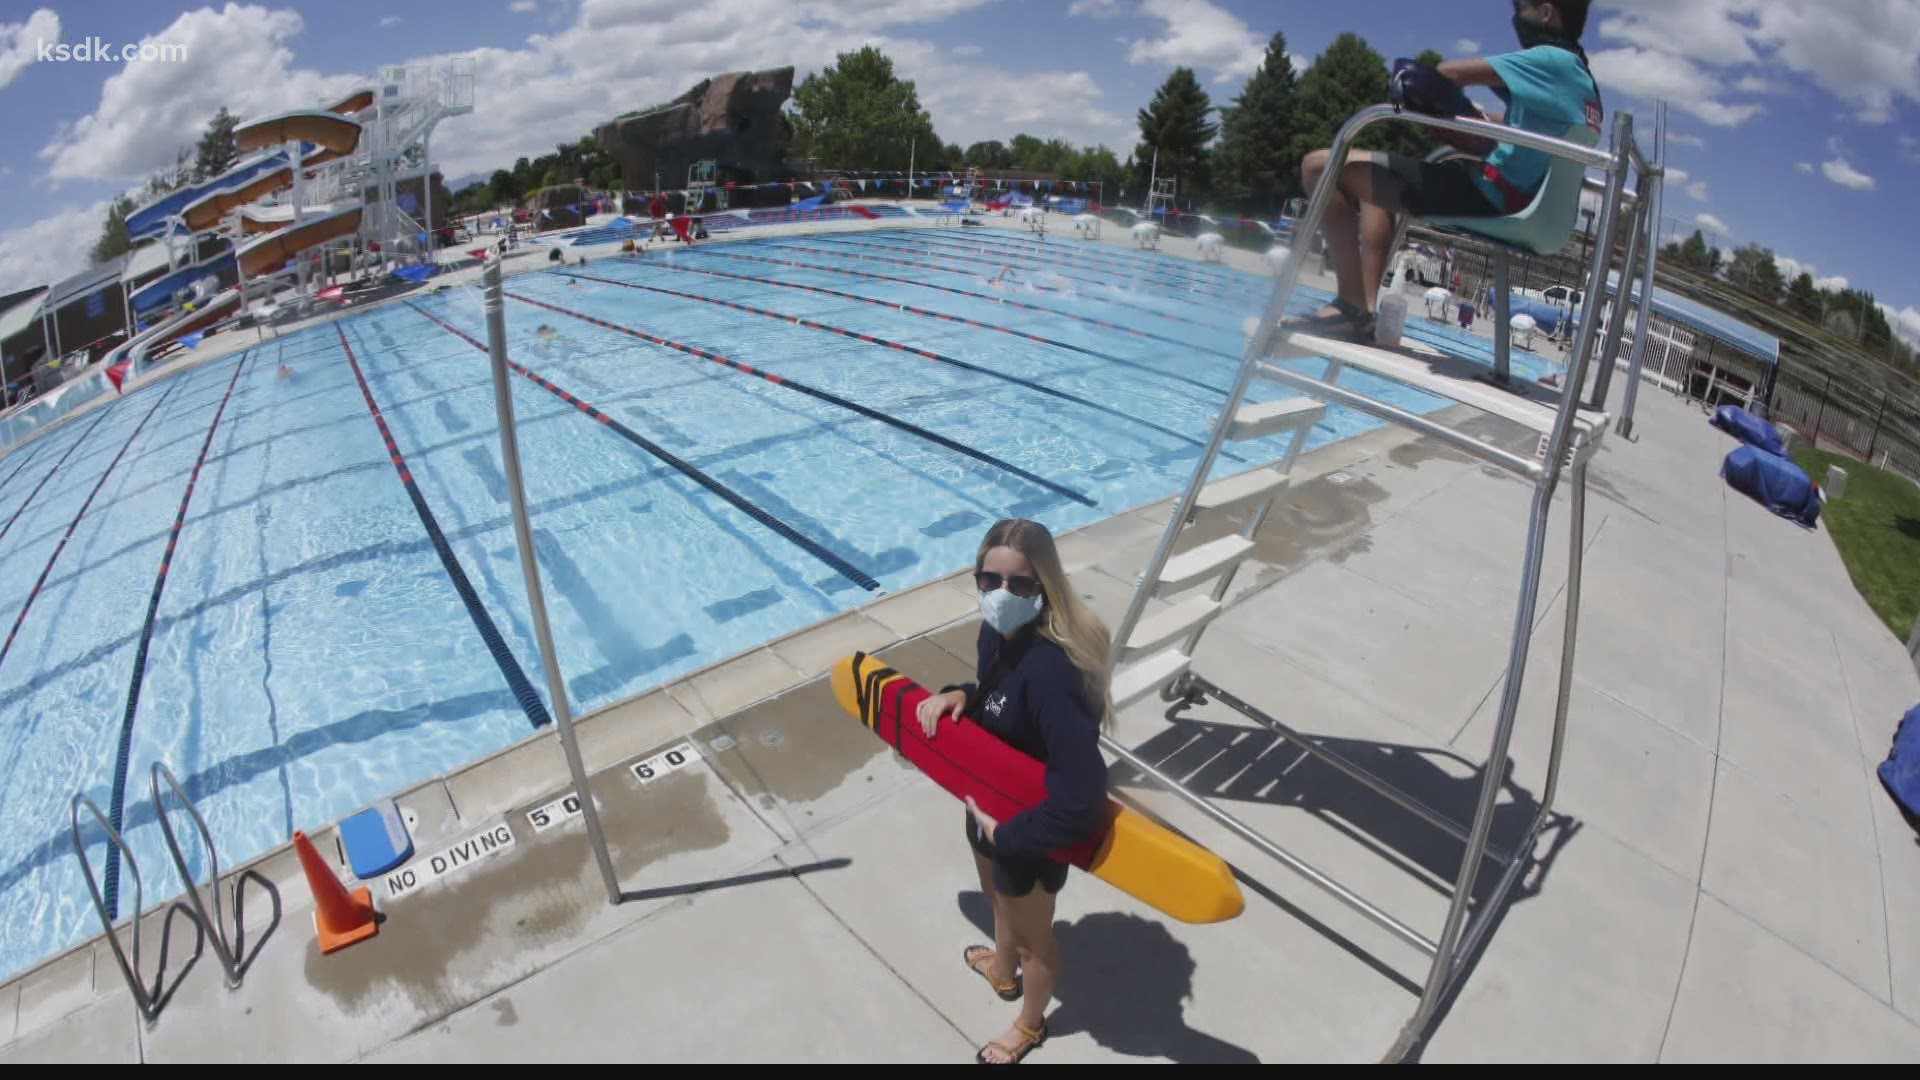 "I think it's ok to go to a well-maintained pool as long as you can still do the key practices we've talked about."